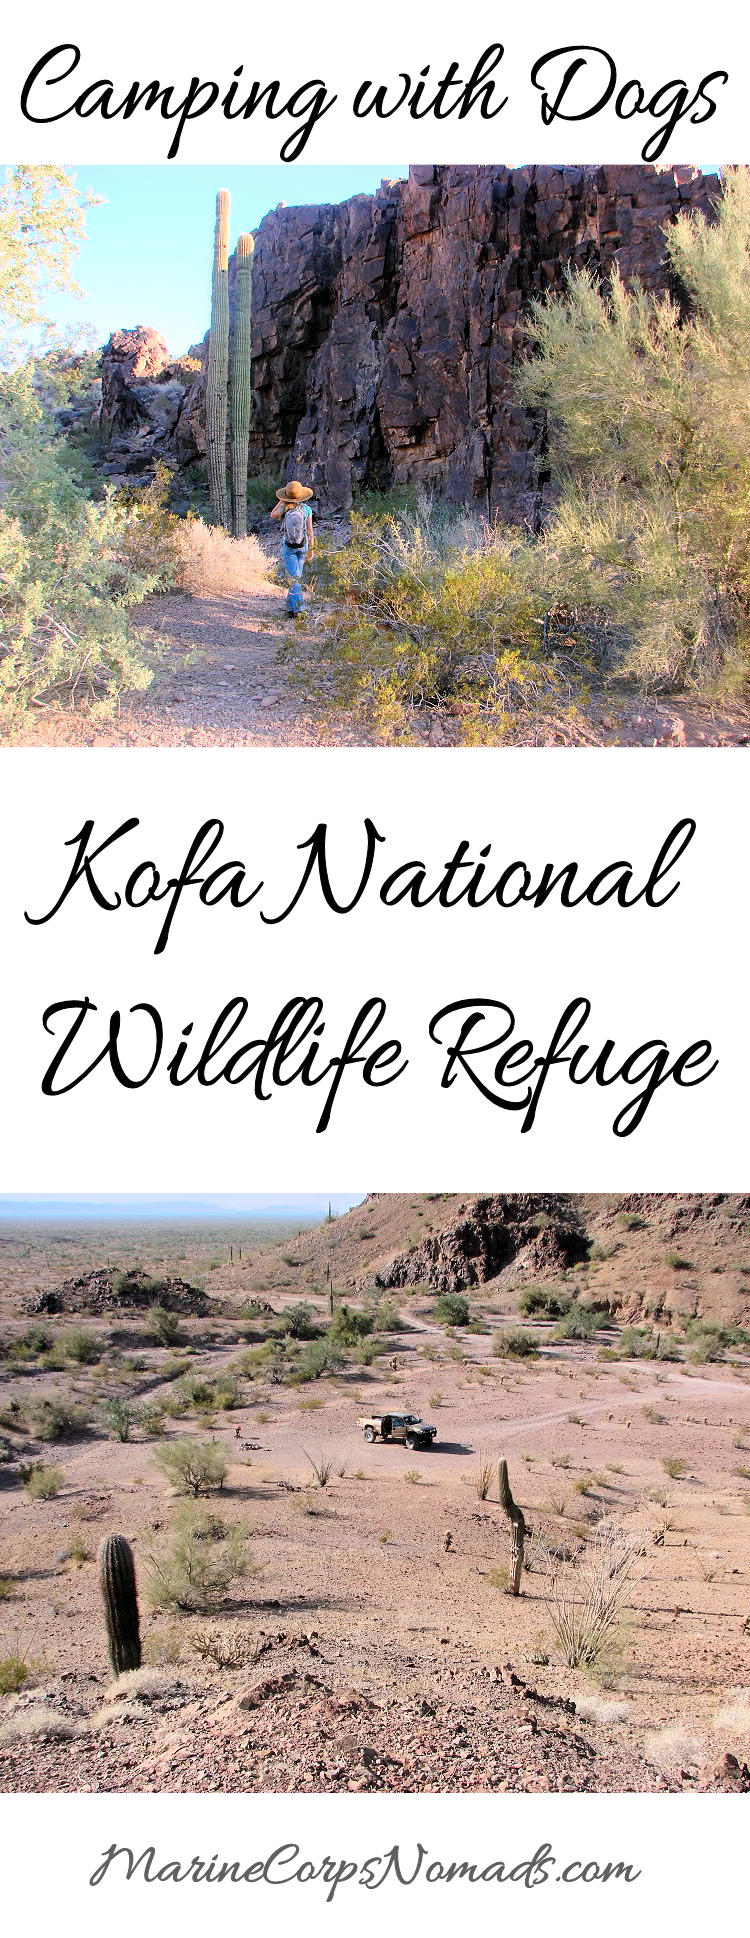 Camping in Kofa National Wildlife Refuge | Camping with Dogs | Hiking with Dogs | Explore Arizona | Marine Corps Nomads